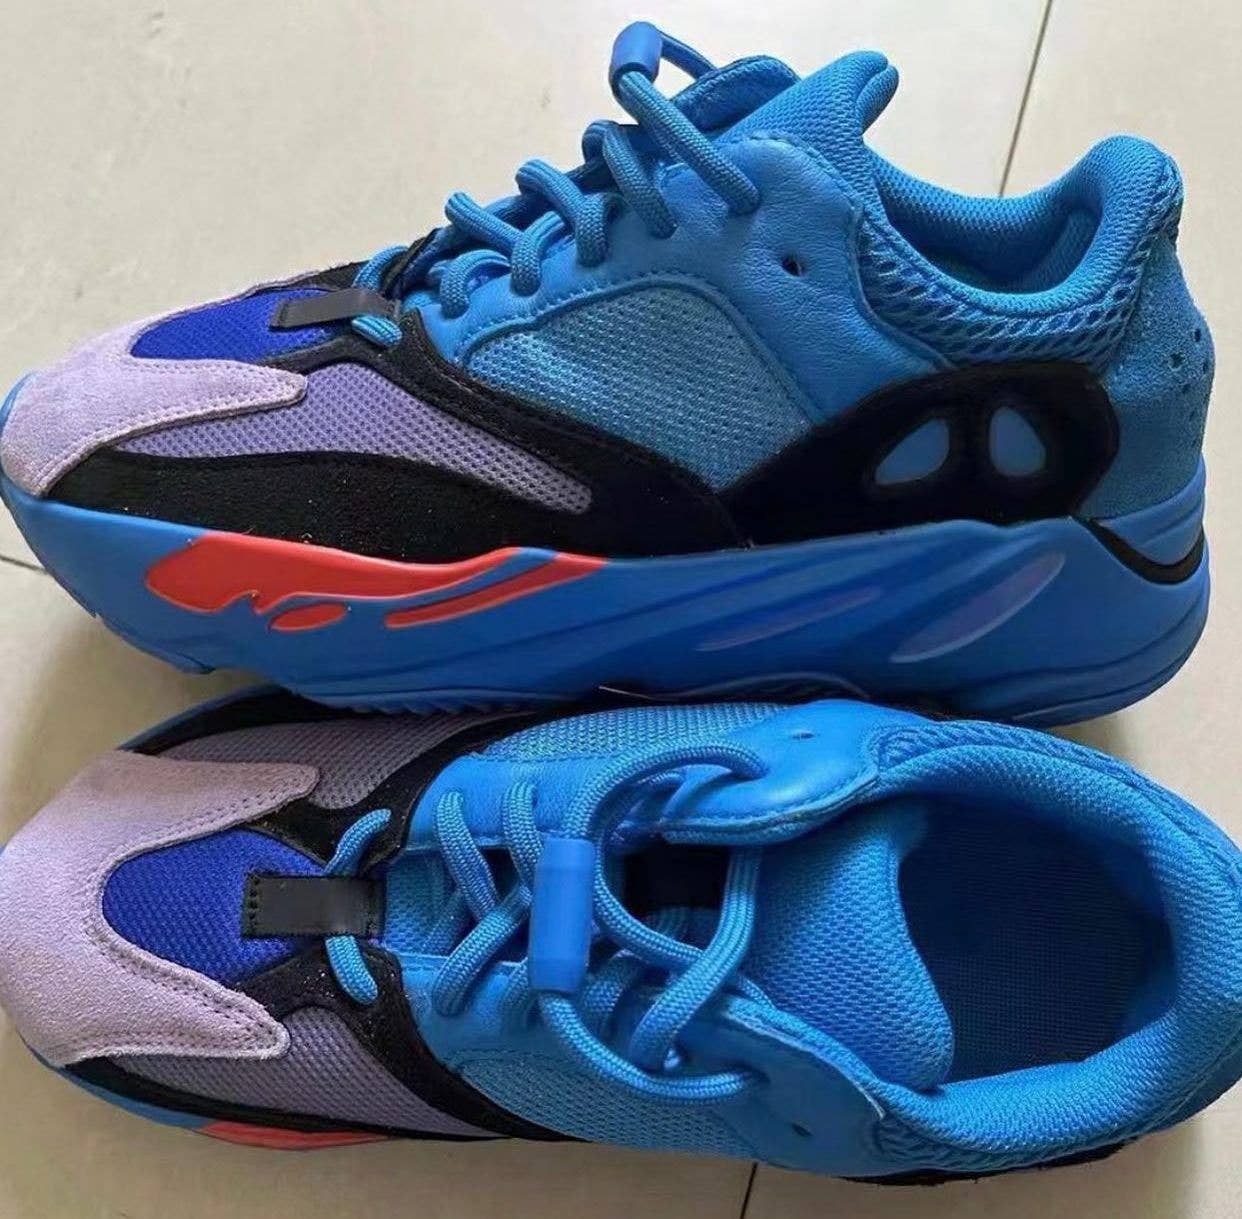 Adidas Yeezy Boost 700 'Hi-Res Blue' Lateral